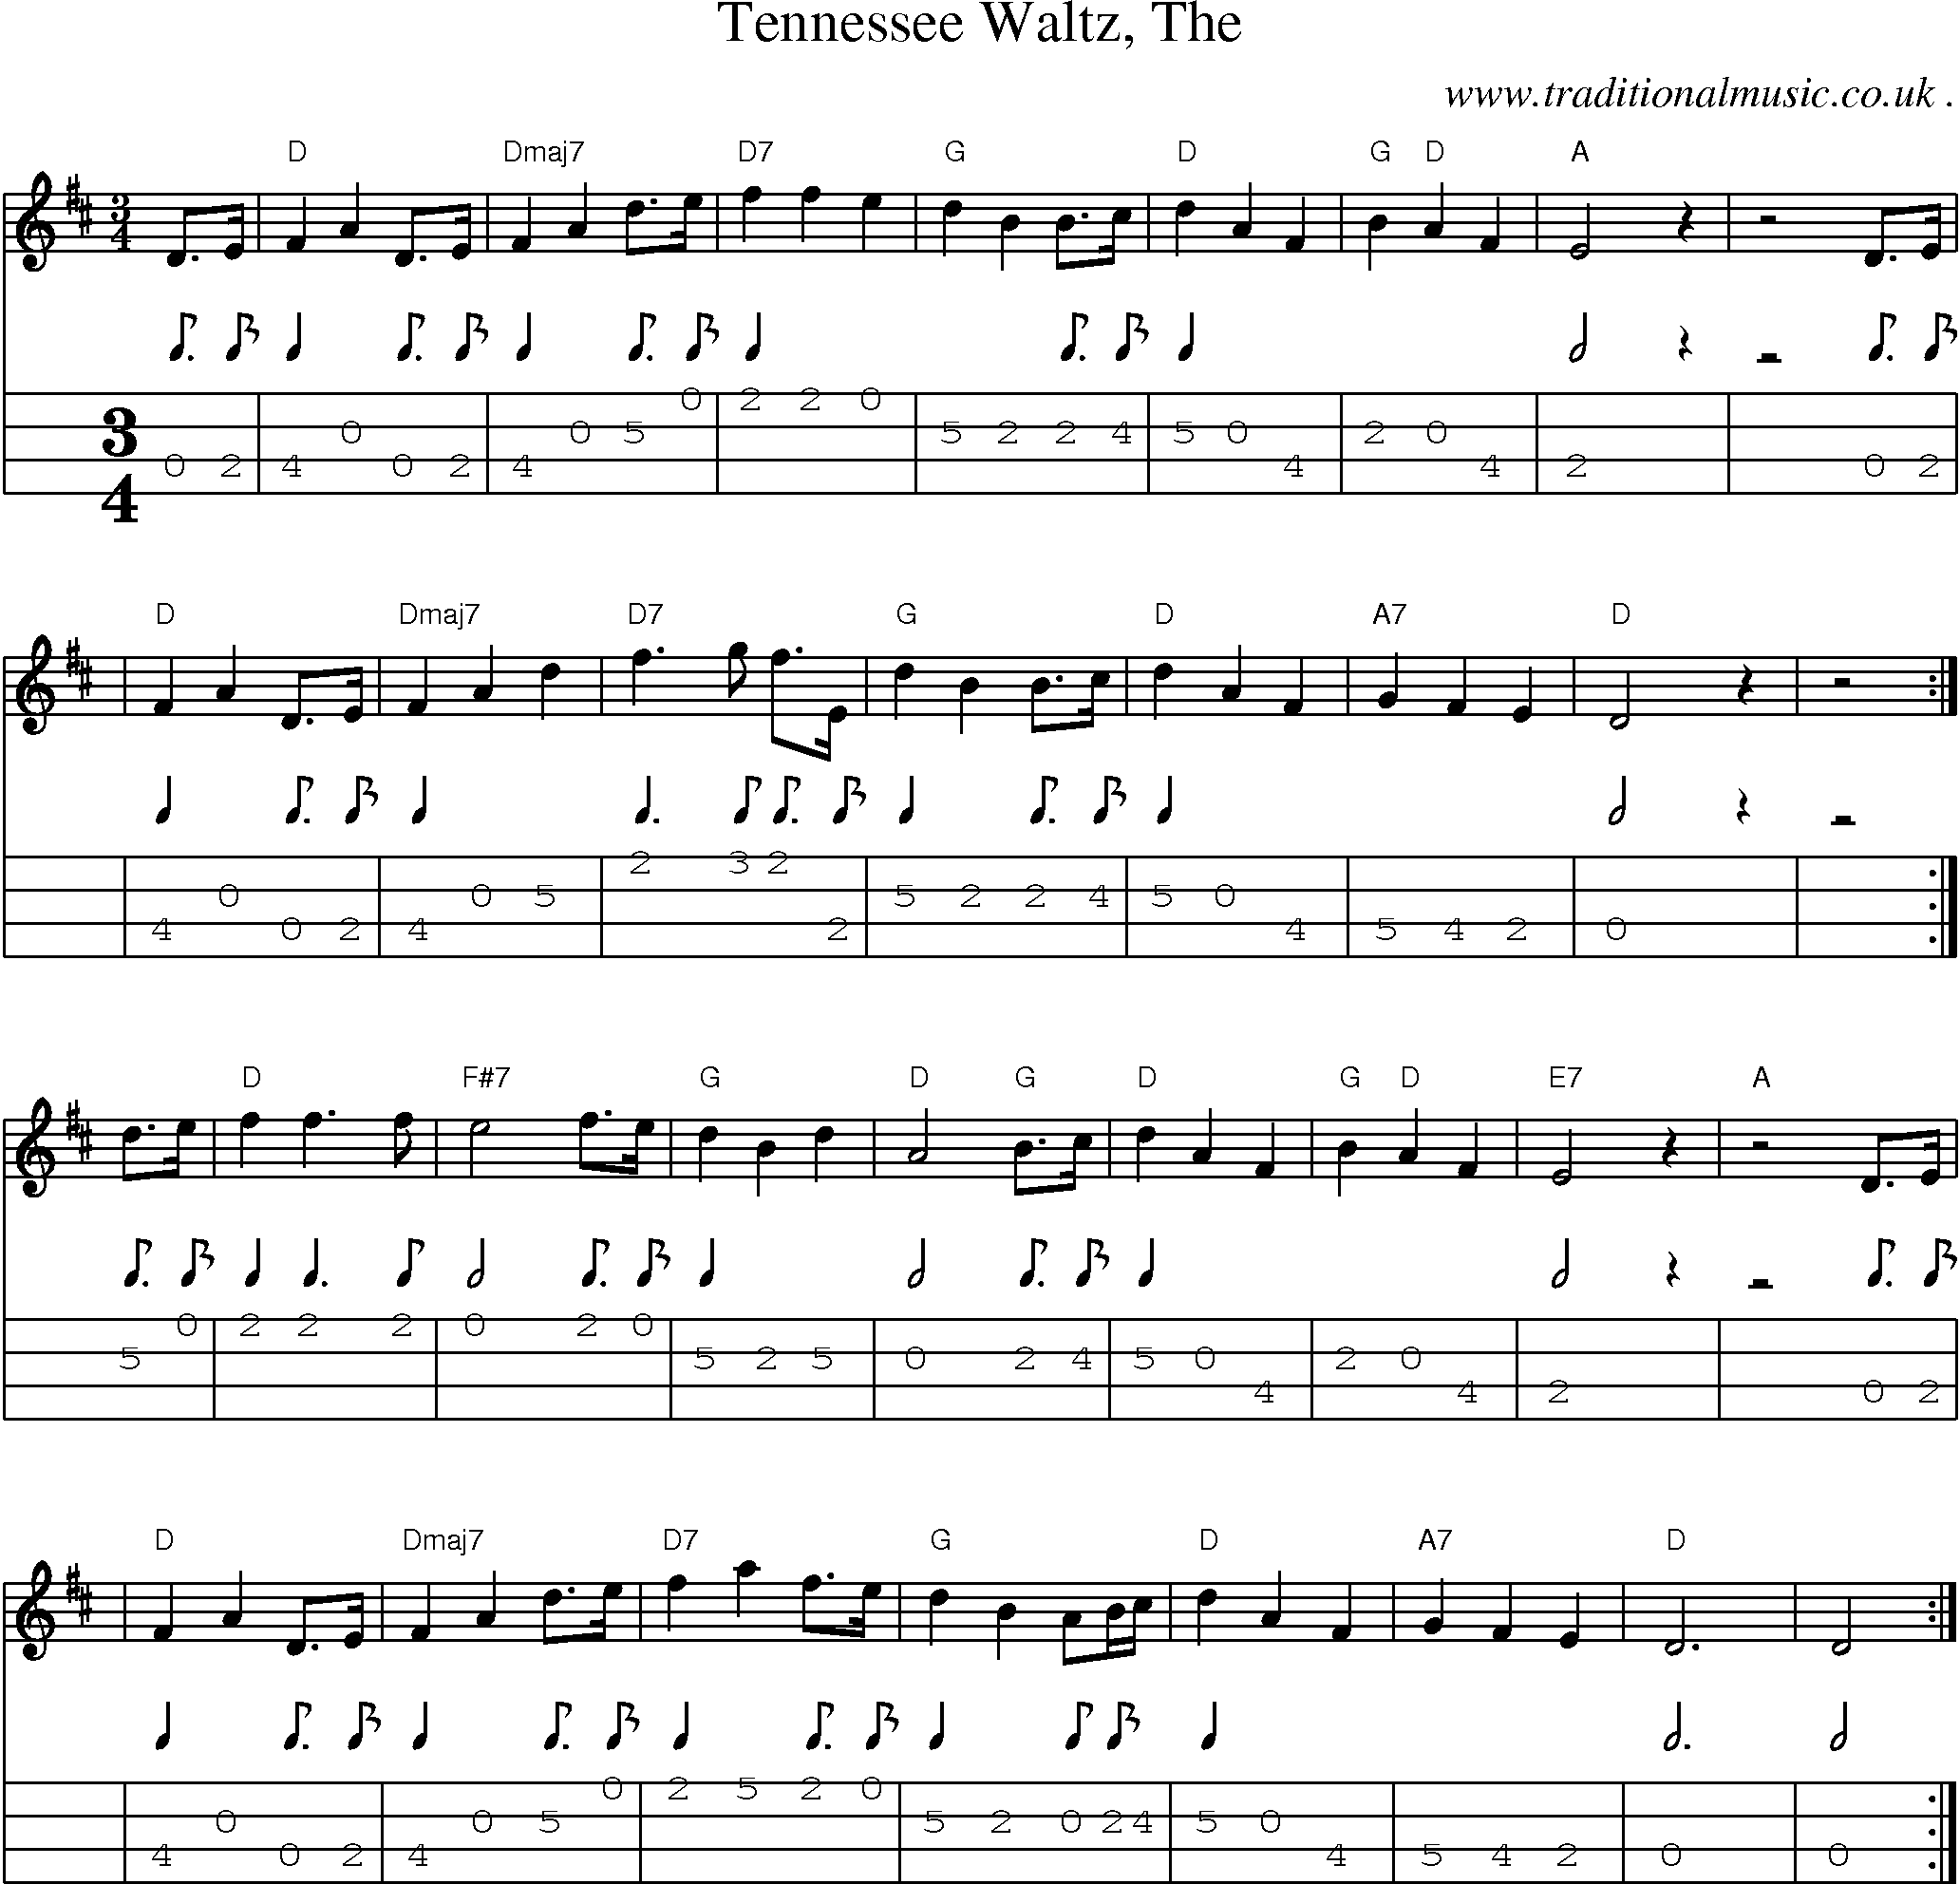 Music Score and Guitar Tabs for Tennessee Waltz The